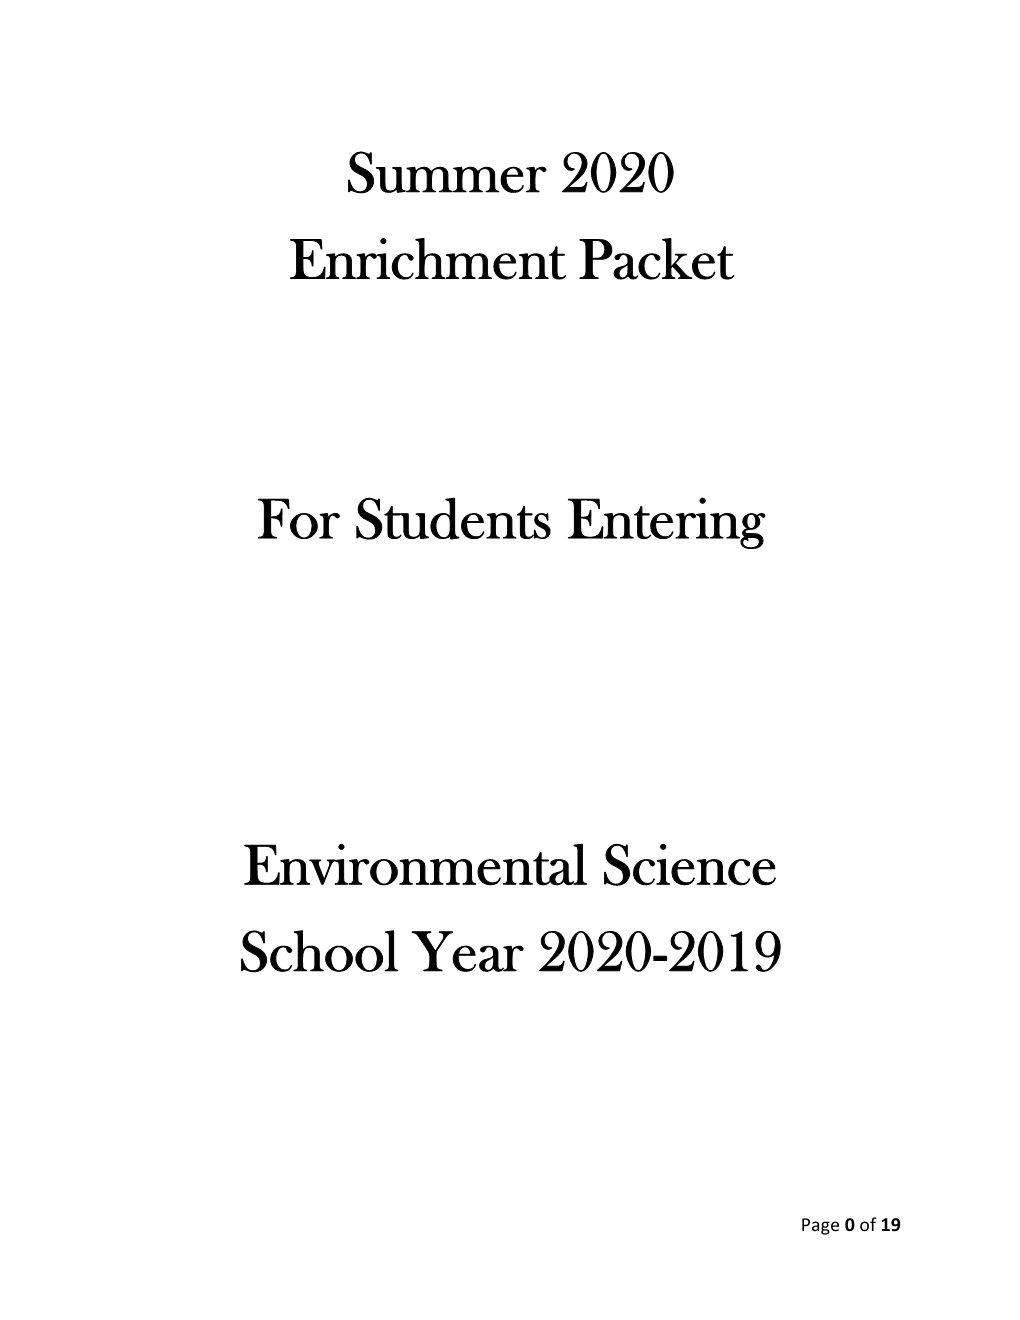 Summer 2020 Enrichment Packet for Students Entering Environmental Science - School Year 2020-2019